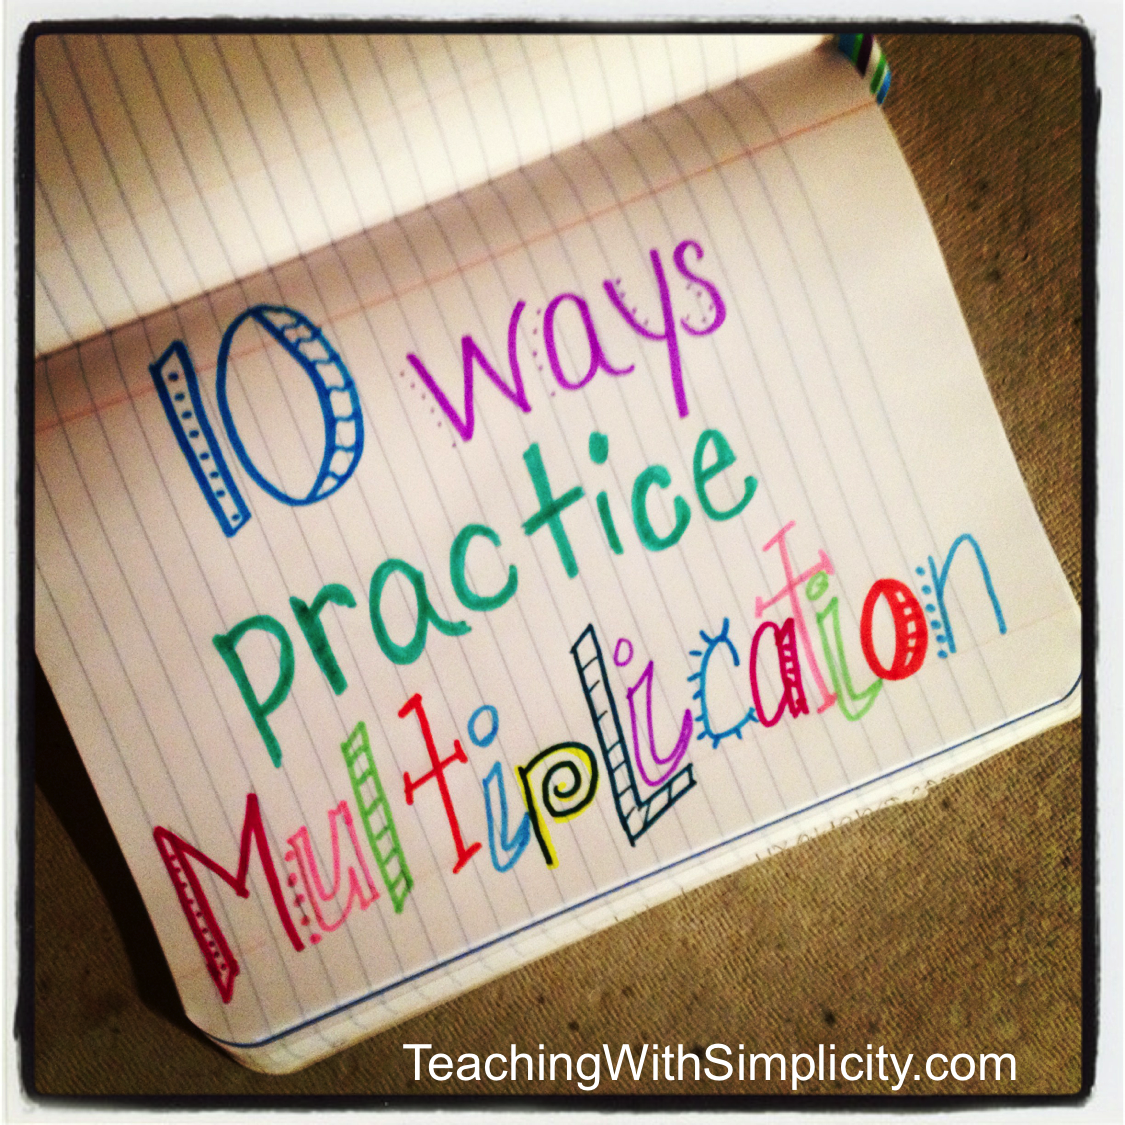 How can you help students learn multiplication?